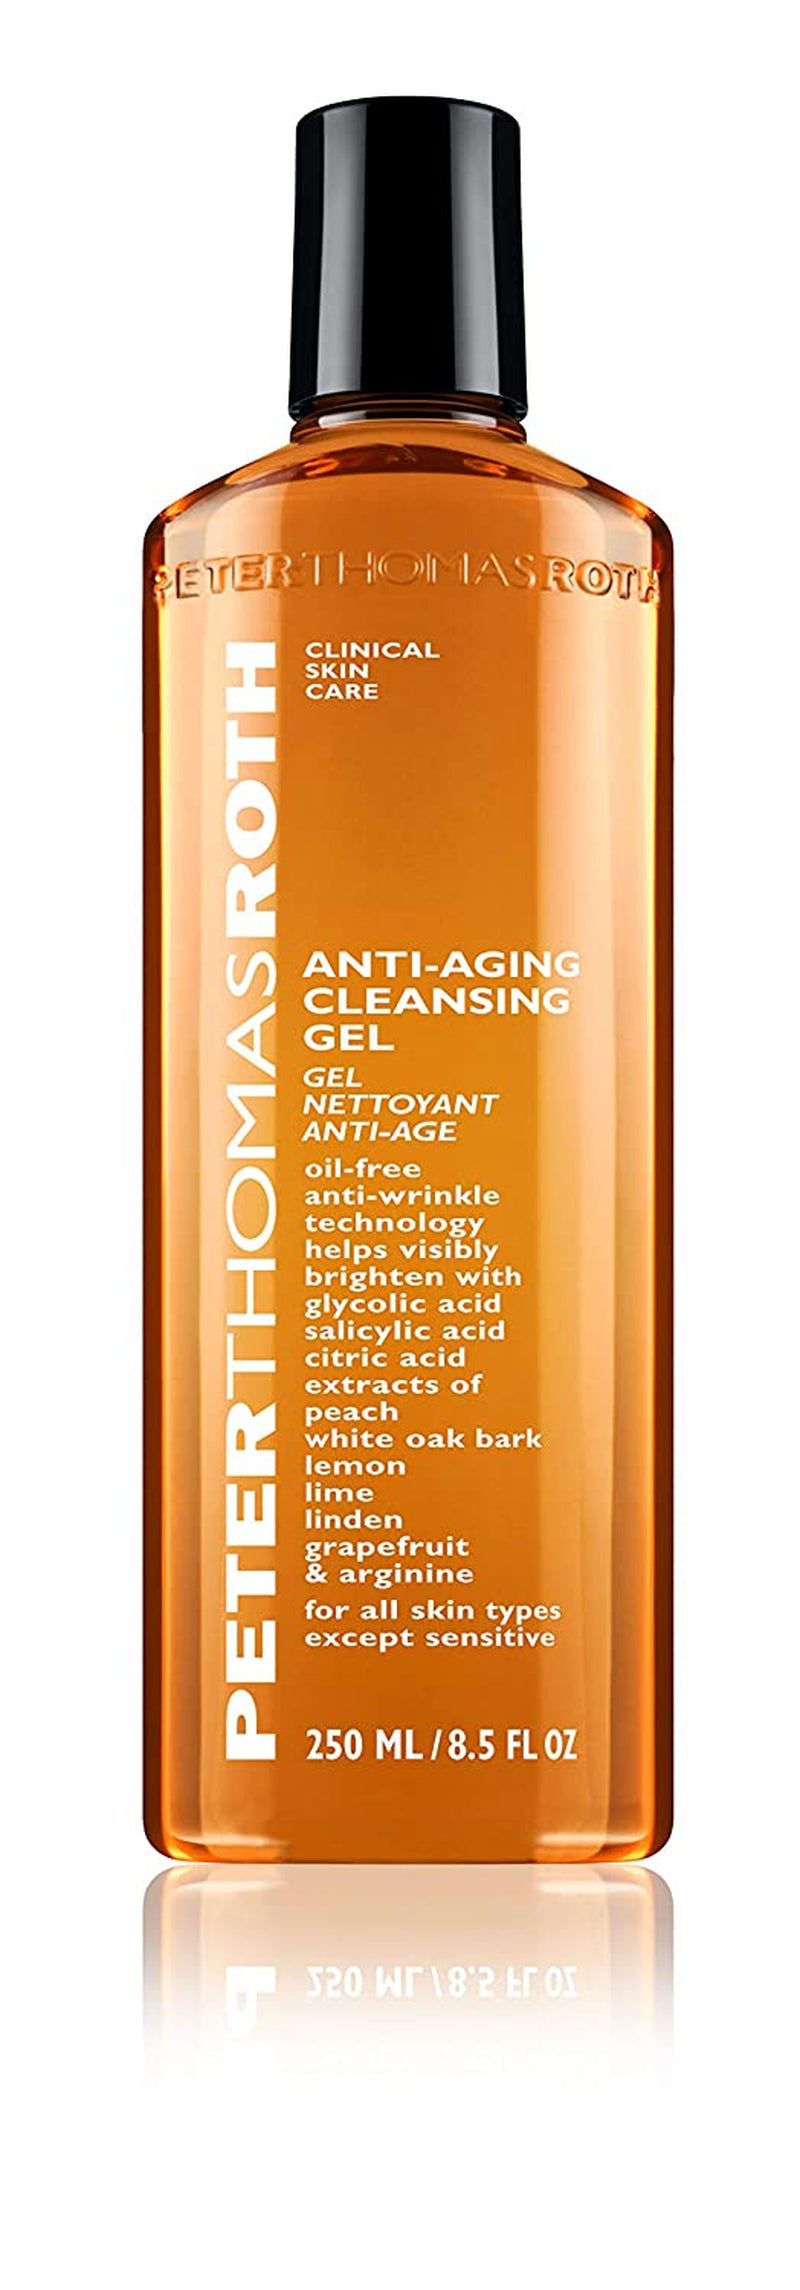 | Anti-Aging Cleansing Gel | Face Wash with Anti-Wrinkle Technology, Exfoliates with Glycolic Acid and Salicylic Acid